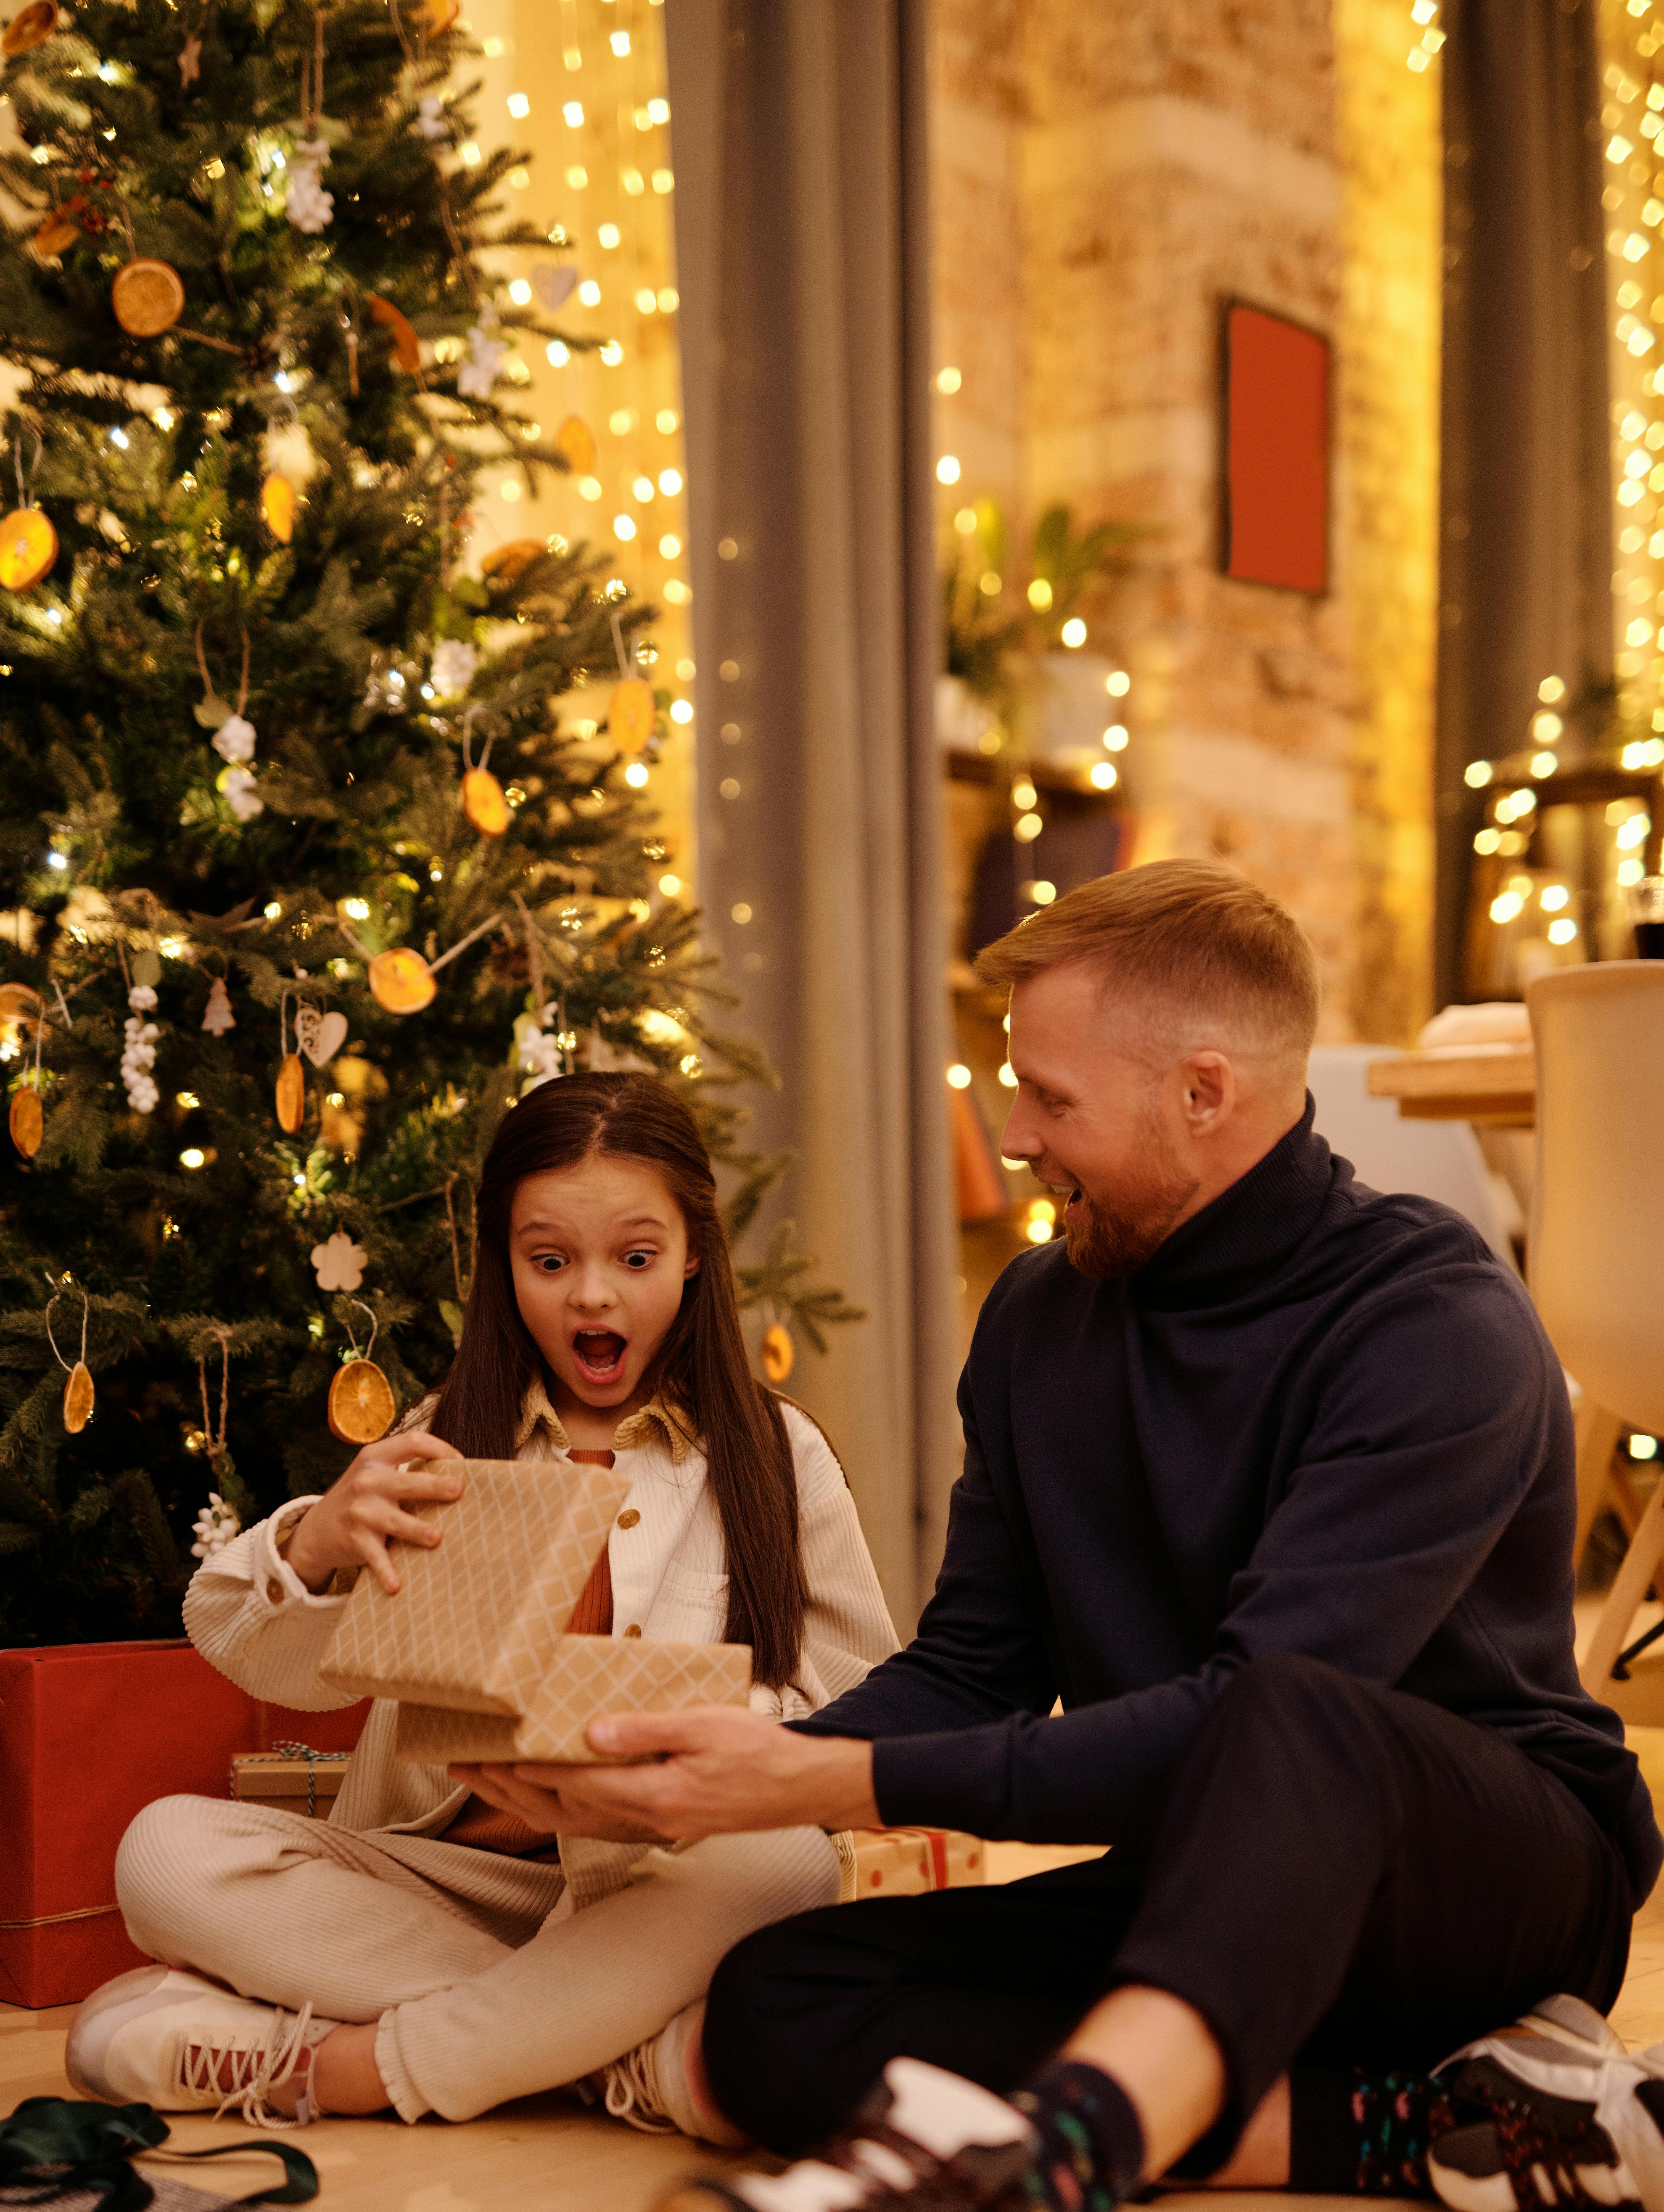 Excited girl looking at her gift with her dad | Source: Pexels